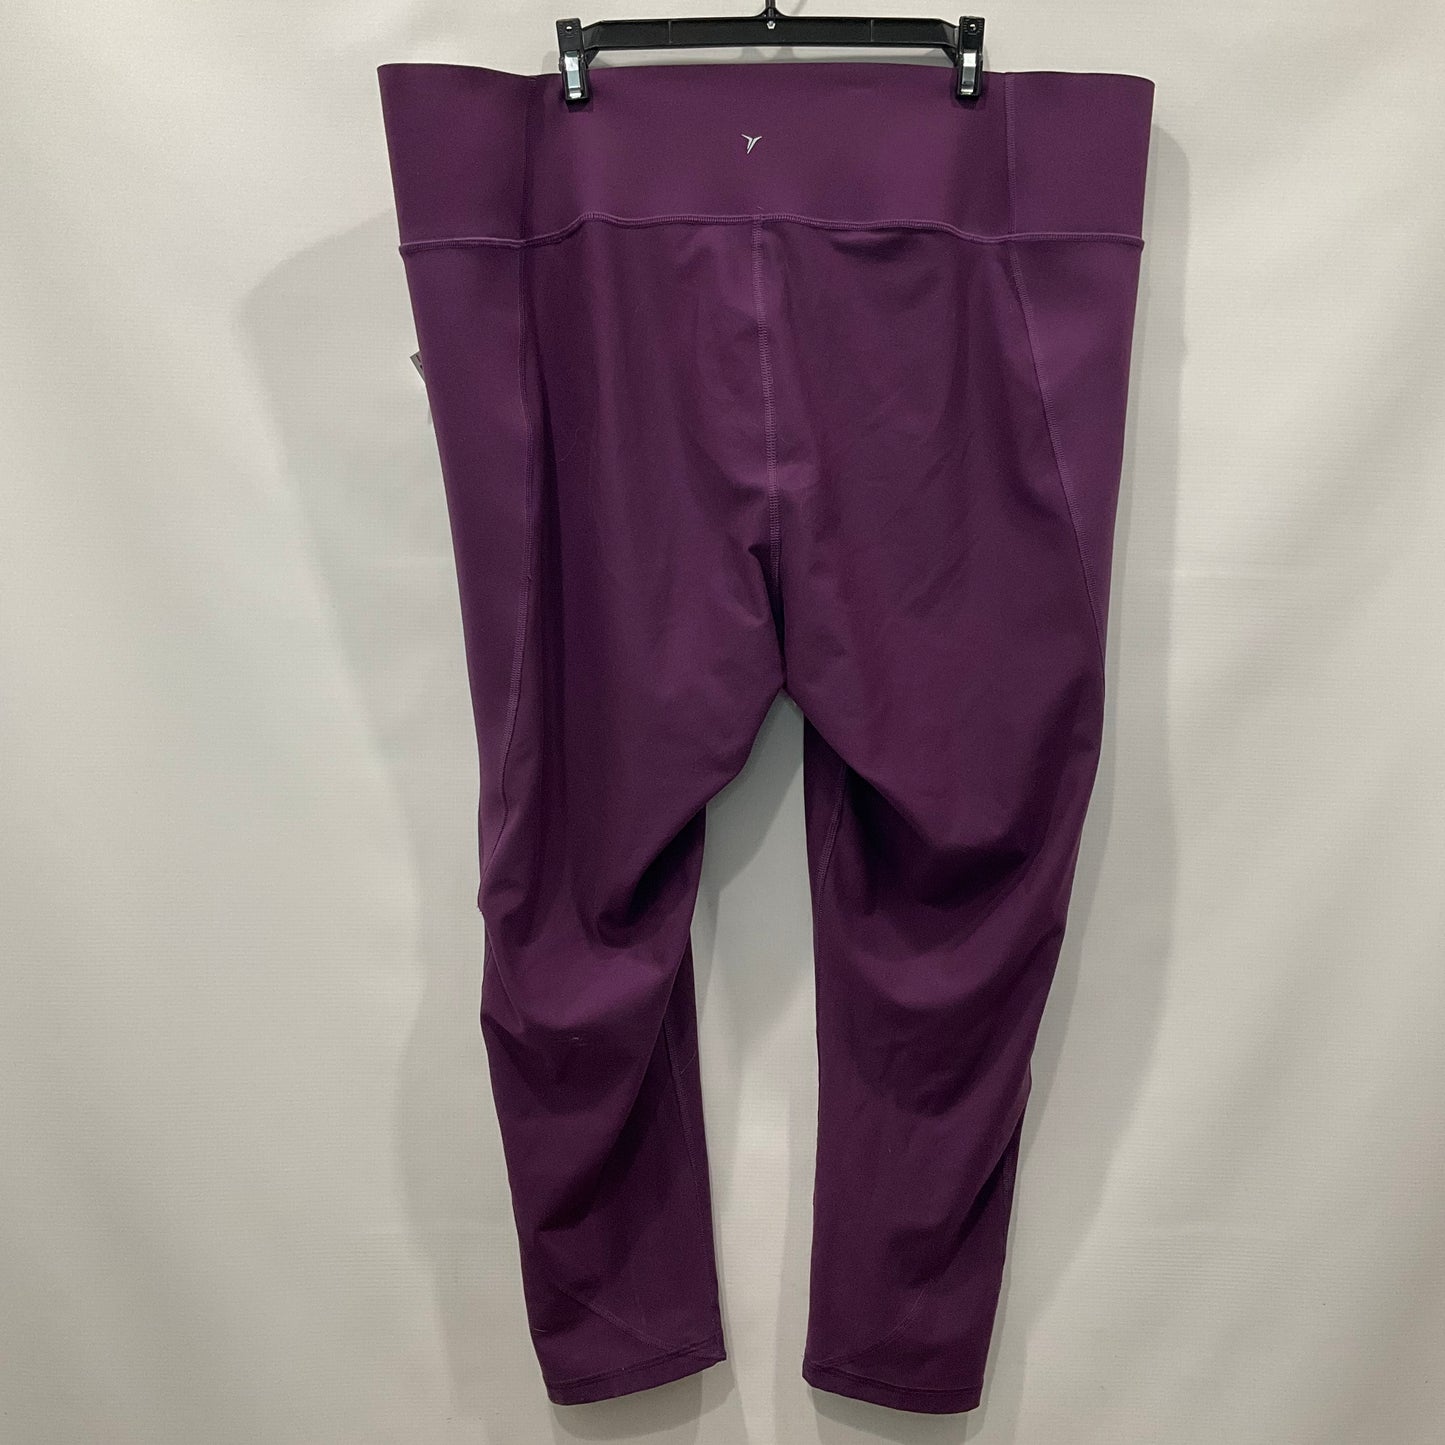 Athletic Leggings By Old Navy  Size: 3x